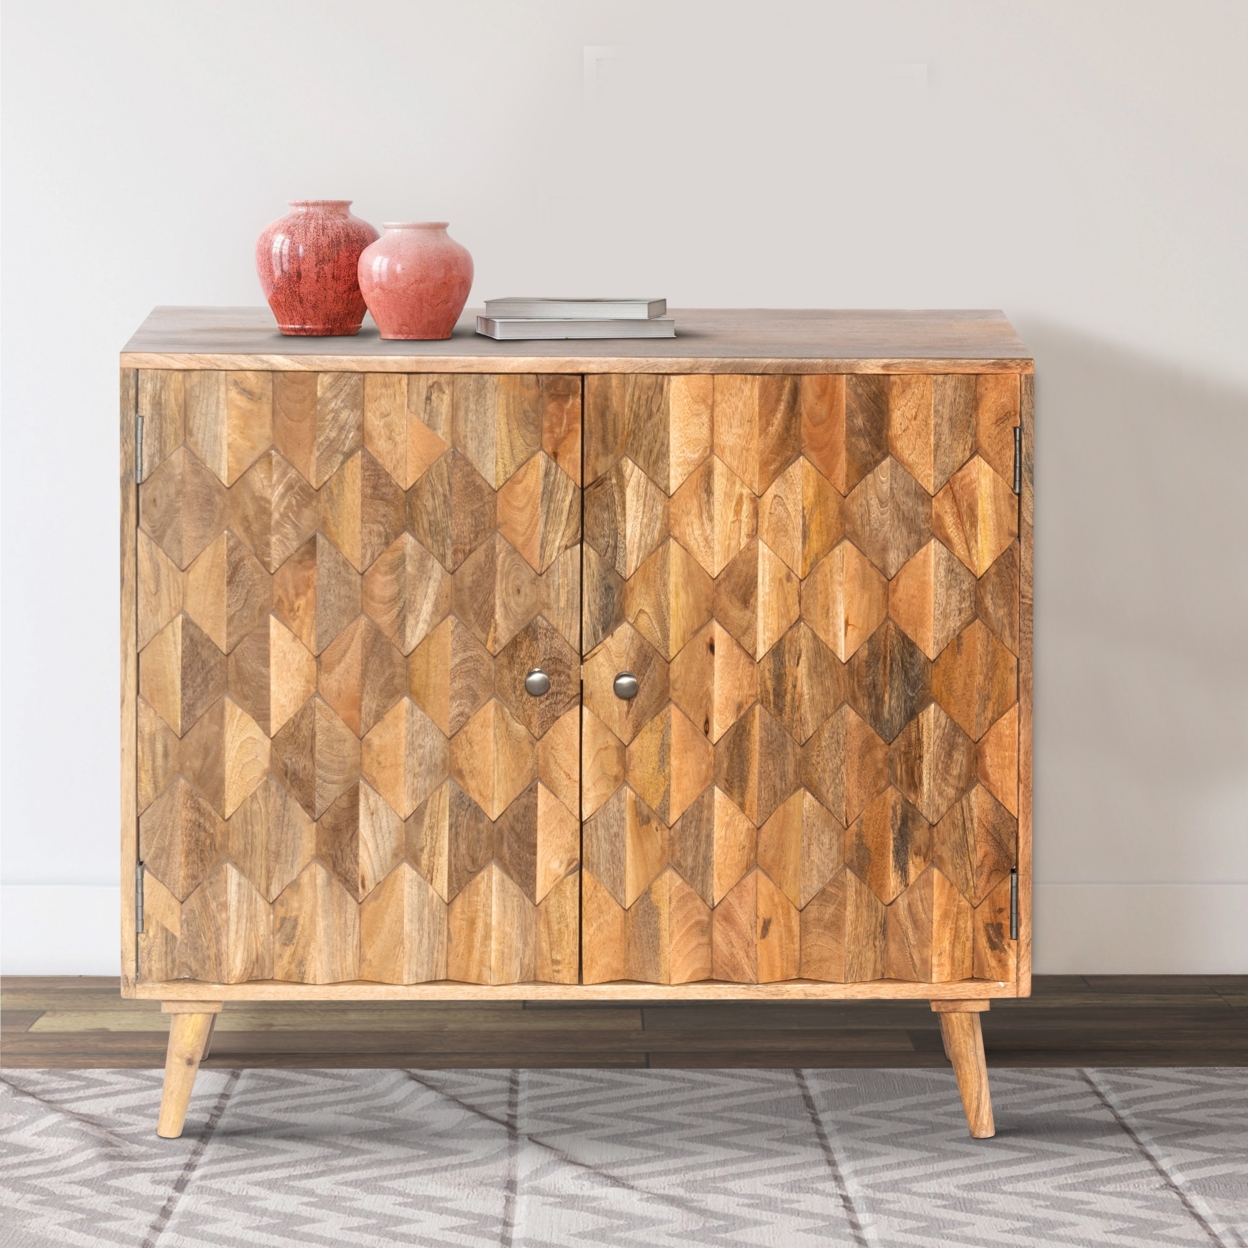 36 Inch Handcrafted Accent Cabinet, 2 Honeycomb Inlaid Doors, Mango Wood, Natural Brown- Saltoro Sherpi